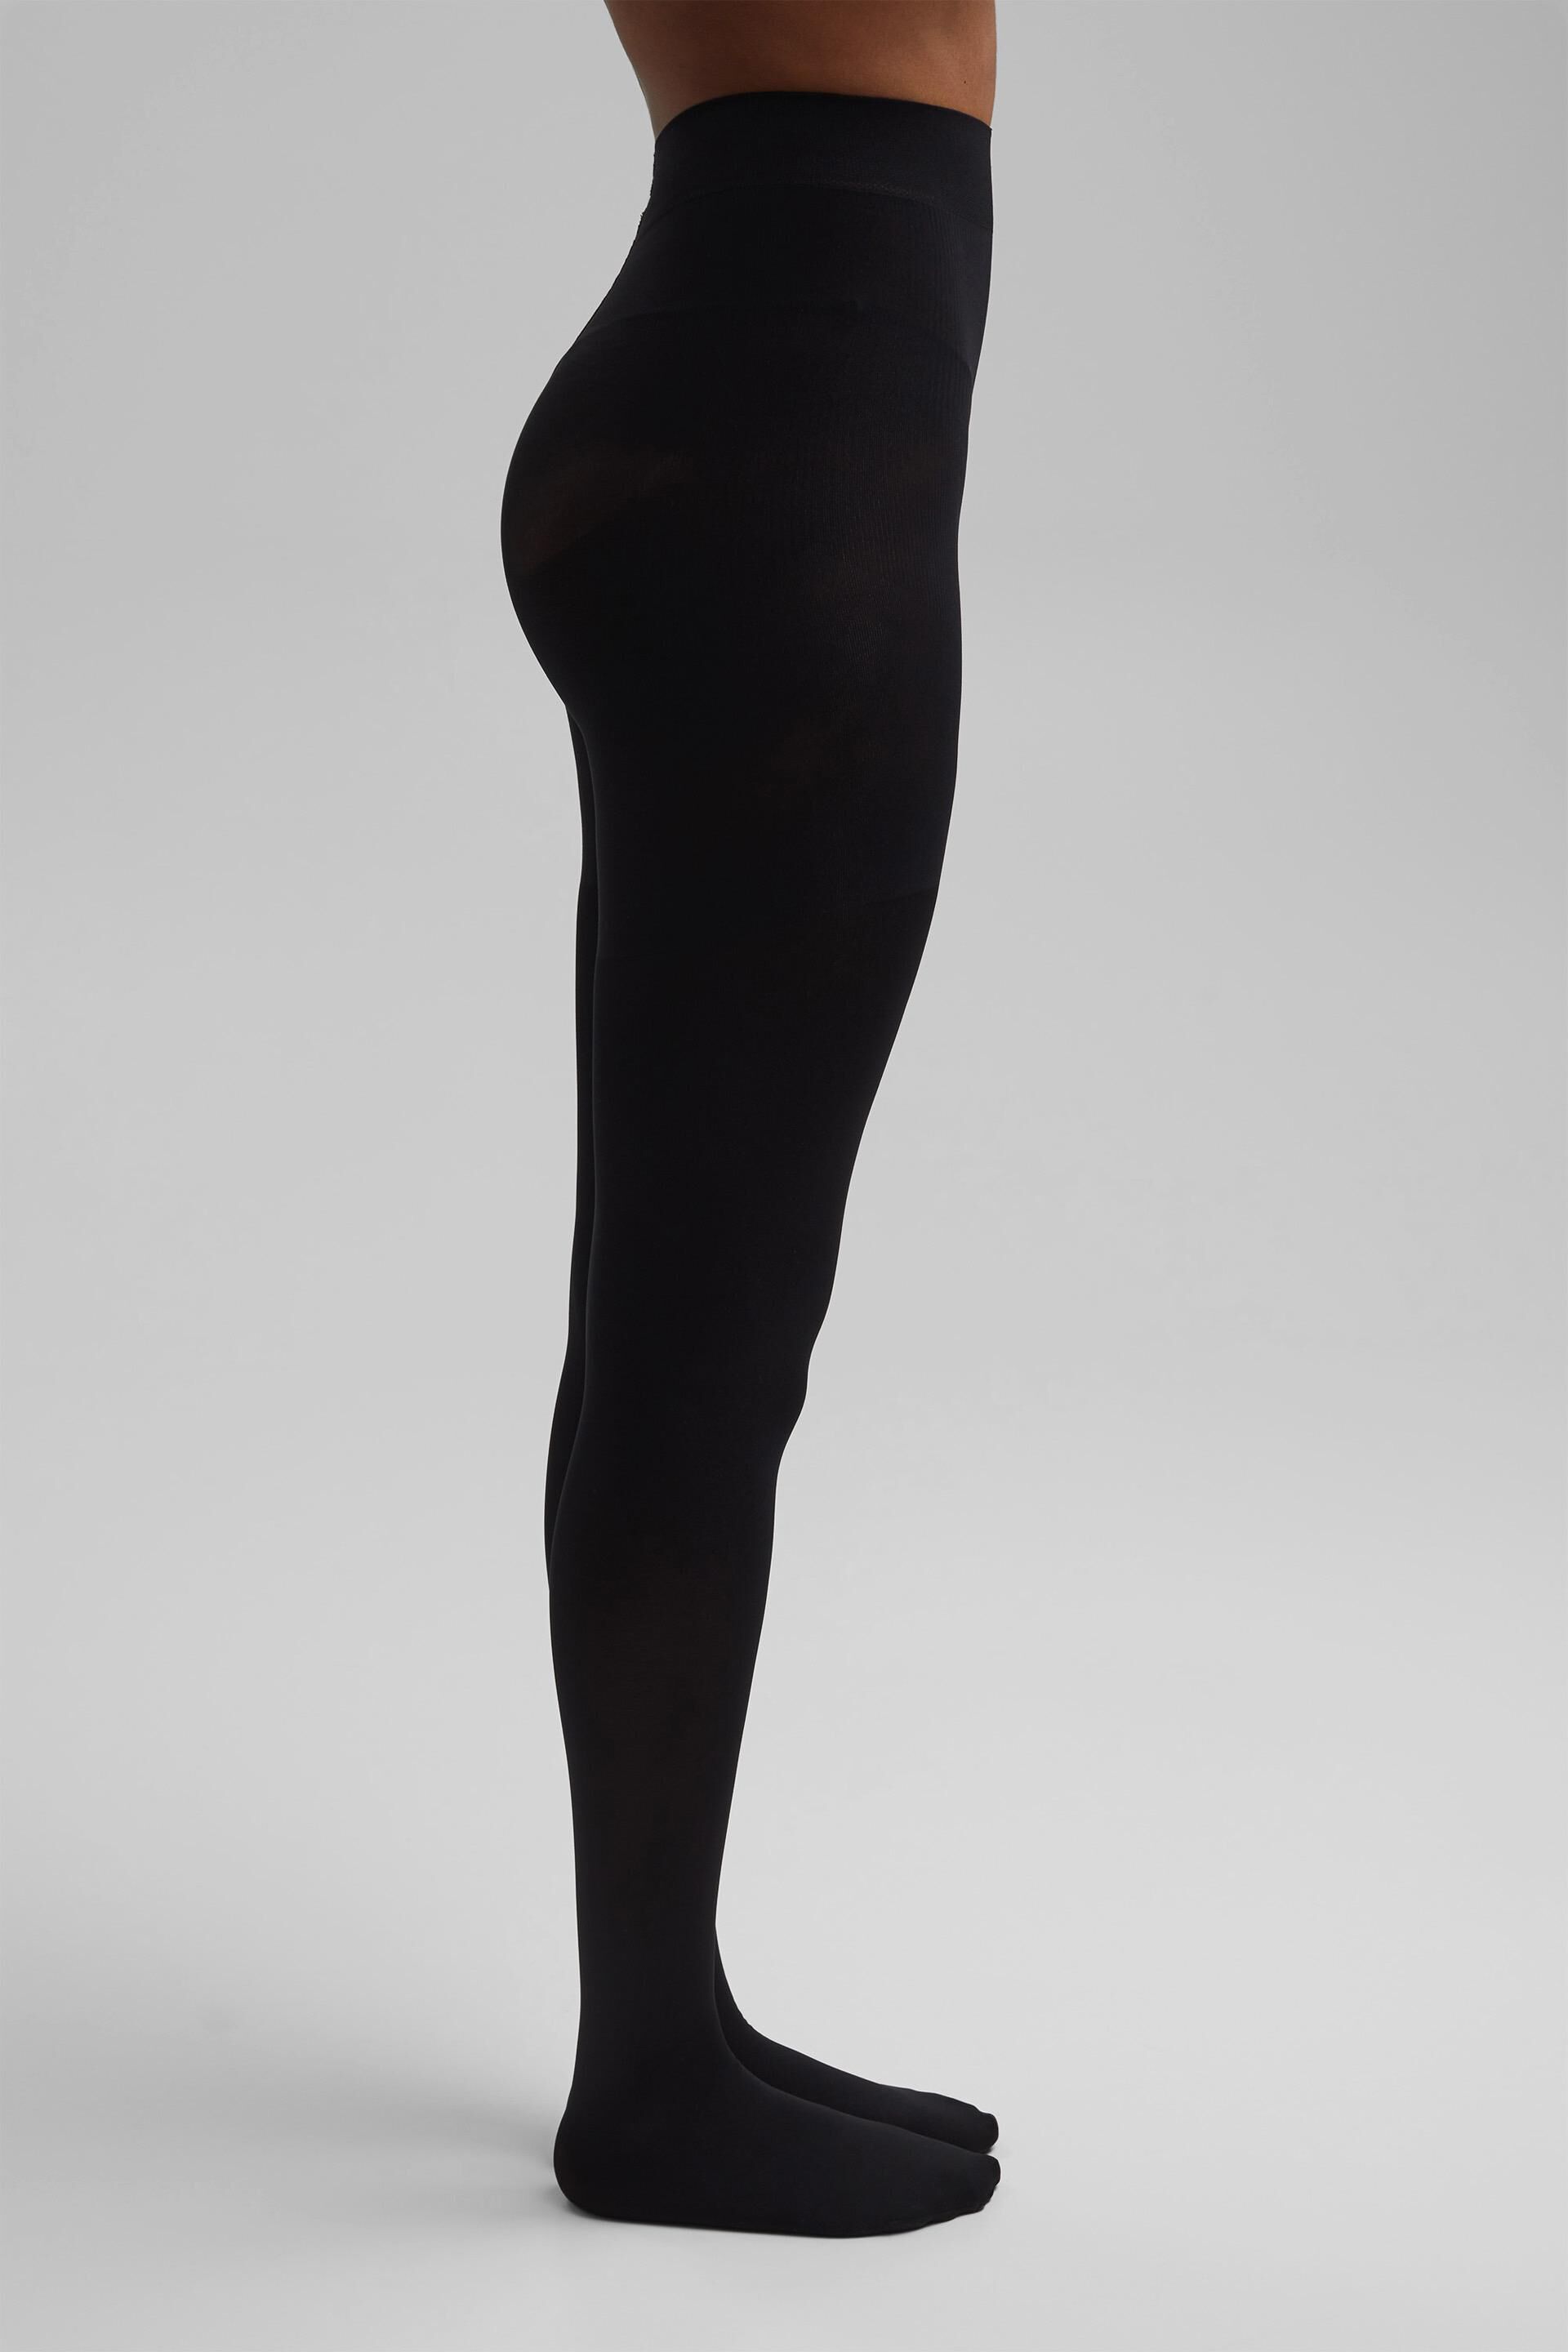 Esprit Tights with 80 a effect, den shaping